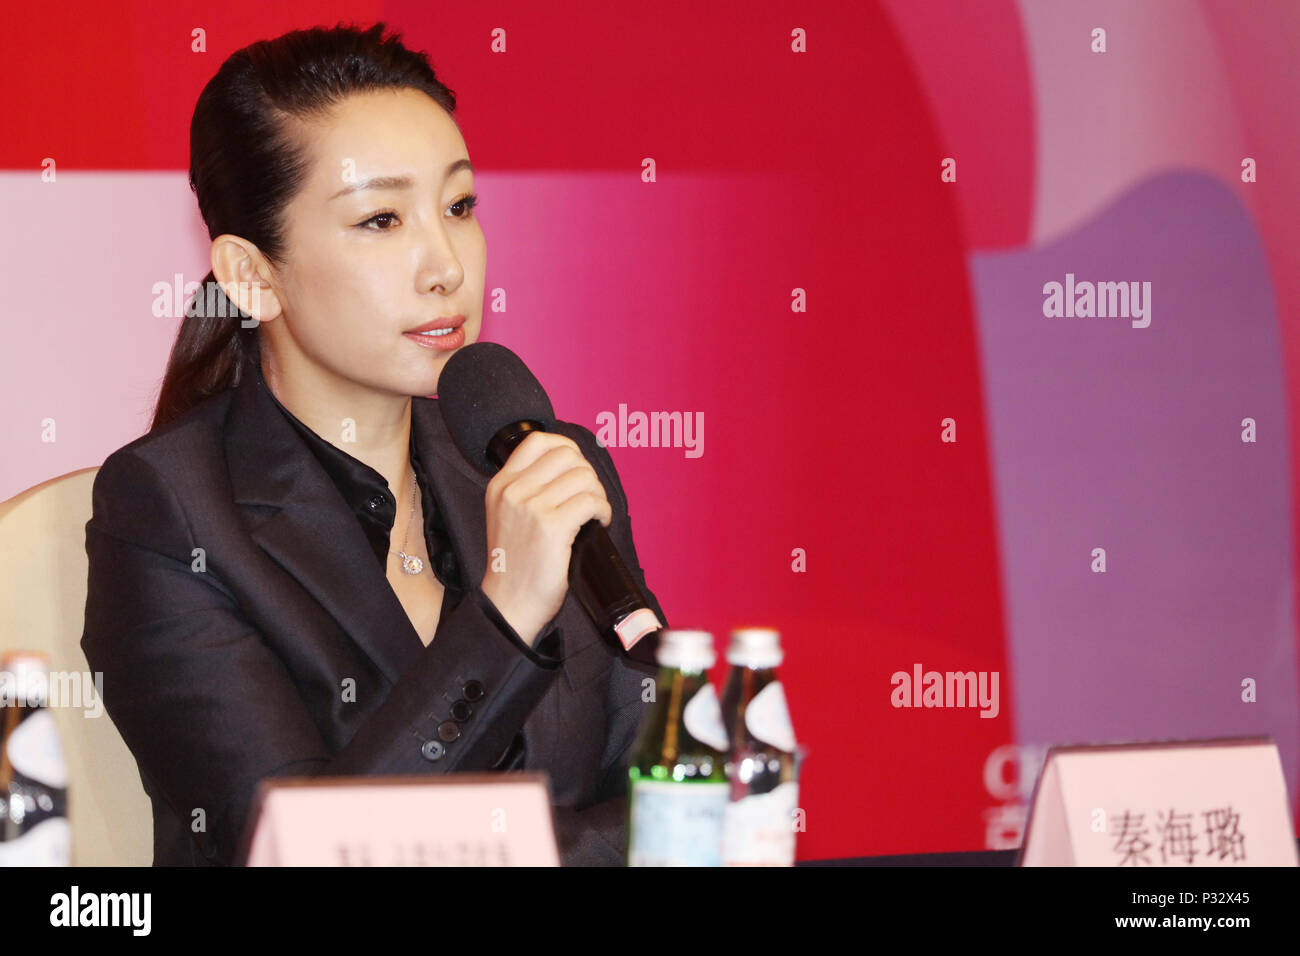 Shanghai, China. 17th June, 2018. Chinese actress Qin Hailu, a jury for the 21st SIFF Golden Goblet Awards, answers questions on a press conference during the Shanghai International Film Festival (SIFF) in Shanghai, east China, June 17, 2018. Credit: Zhu Liangcheng/Xinhua/Alamy Live News Stock Photo